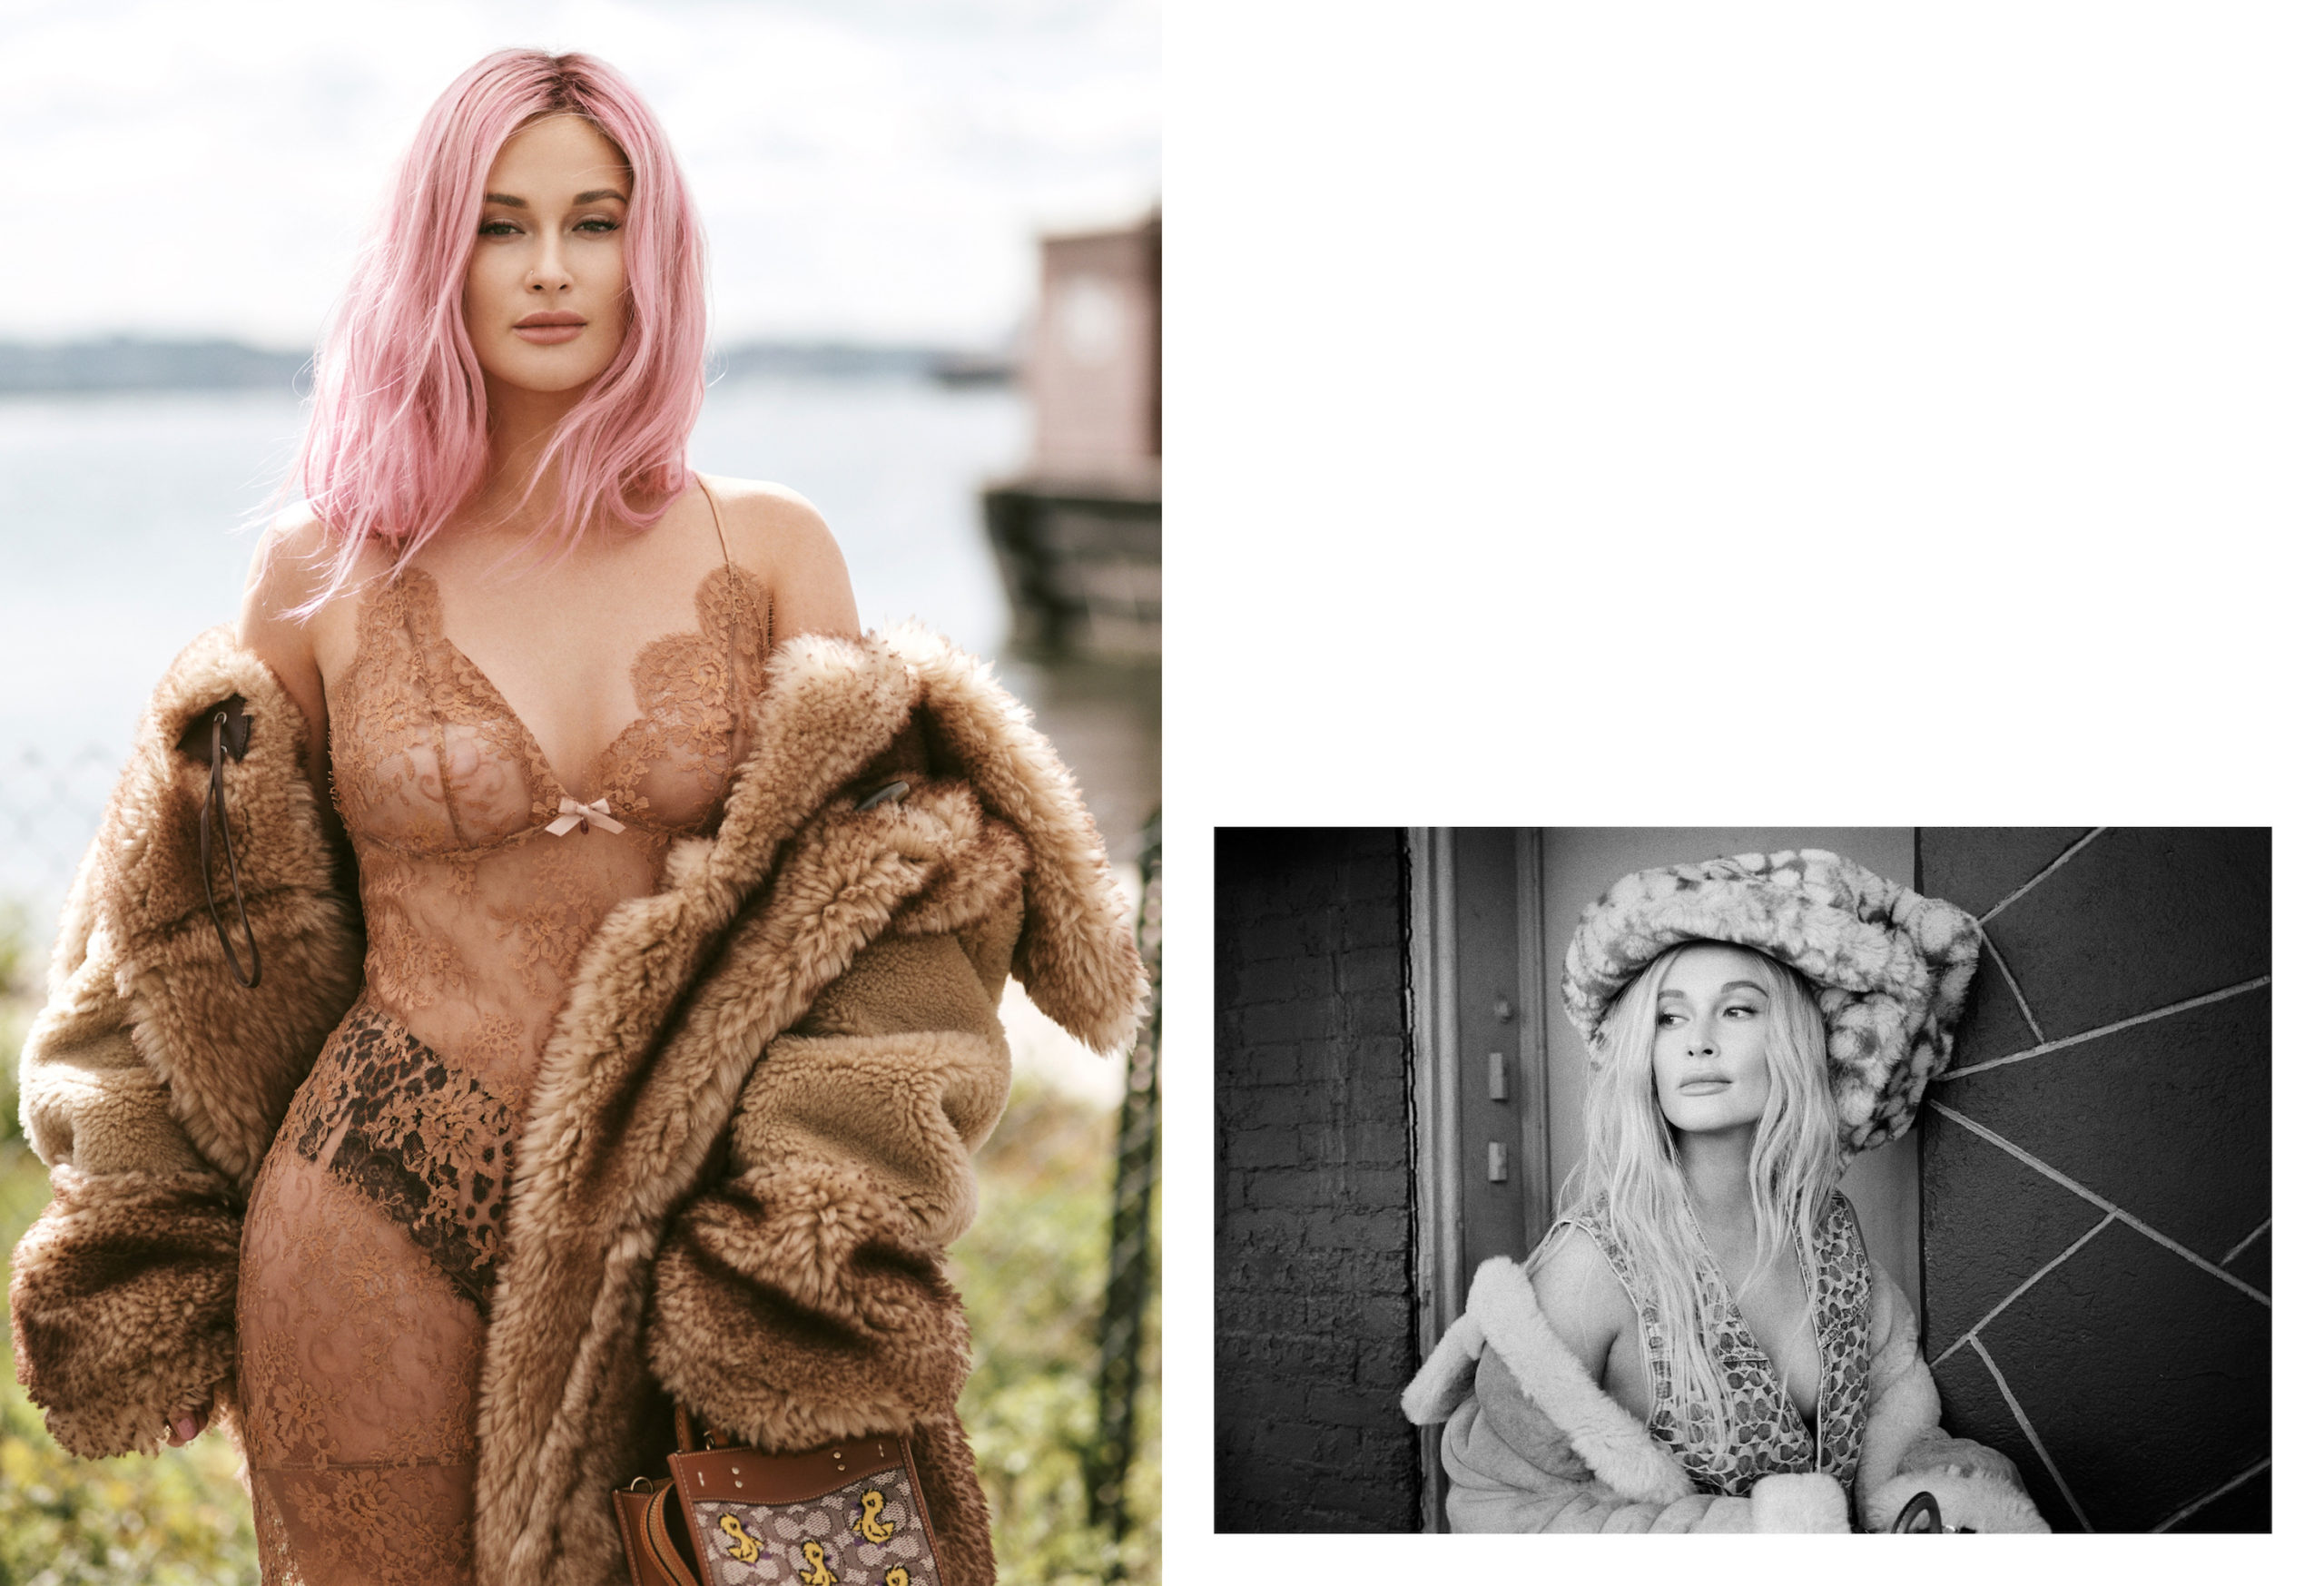  Left image: Coat and bag Coach Dress and briefs Agent Provocateur Ring Laura Lombardi Right image: Clothing and hat Coach, earrings Jennifer Fisher